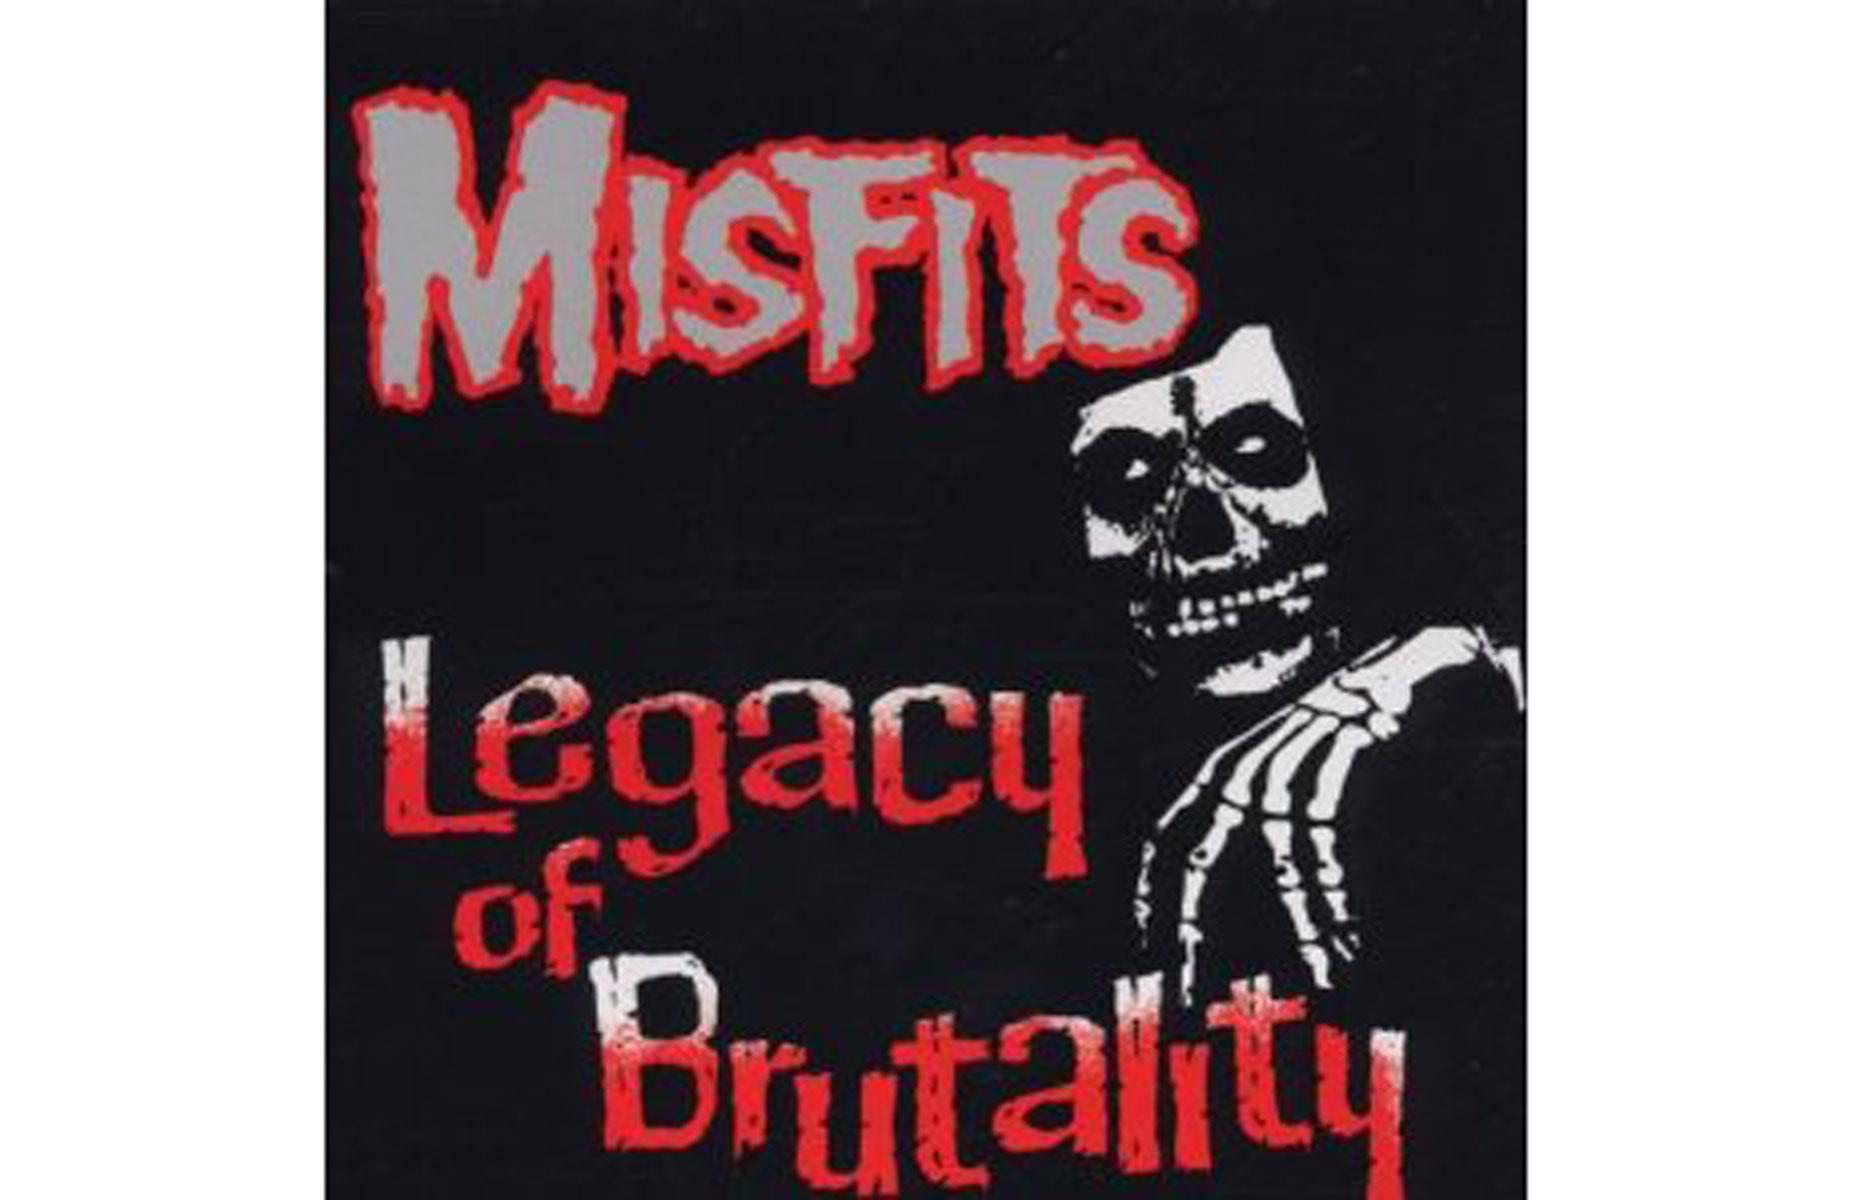 Misfits – Legacy of Brutality: up to $6,000 (£5,098)